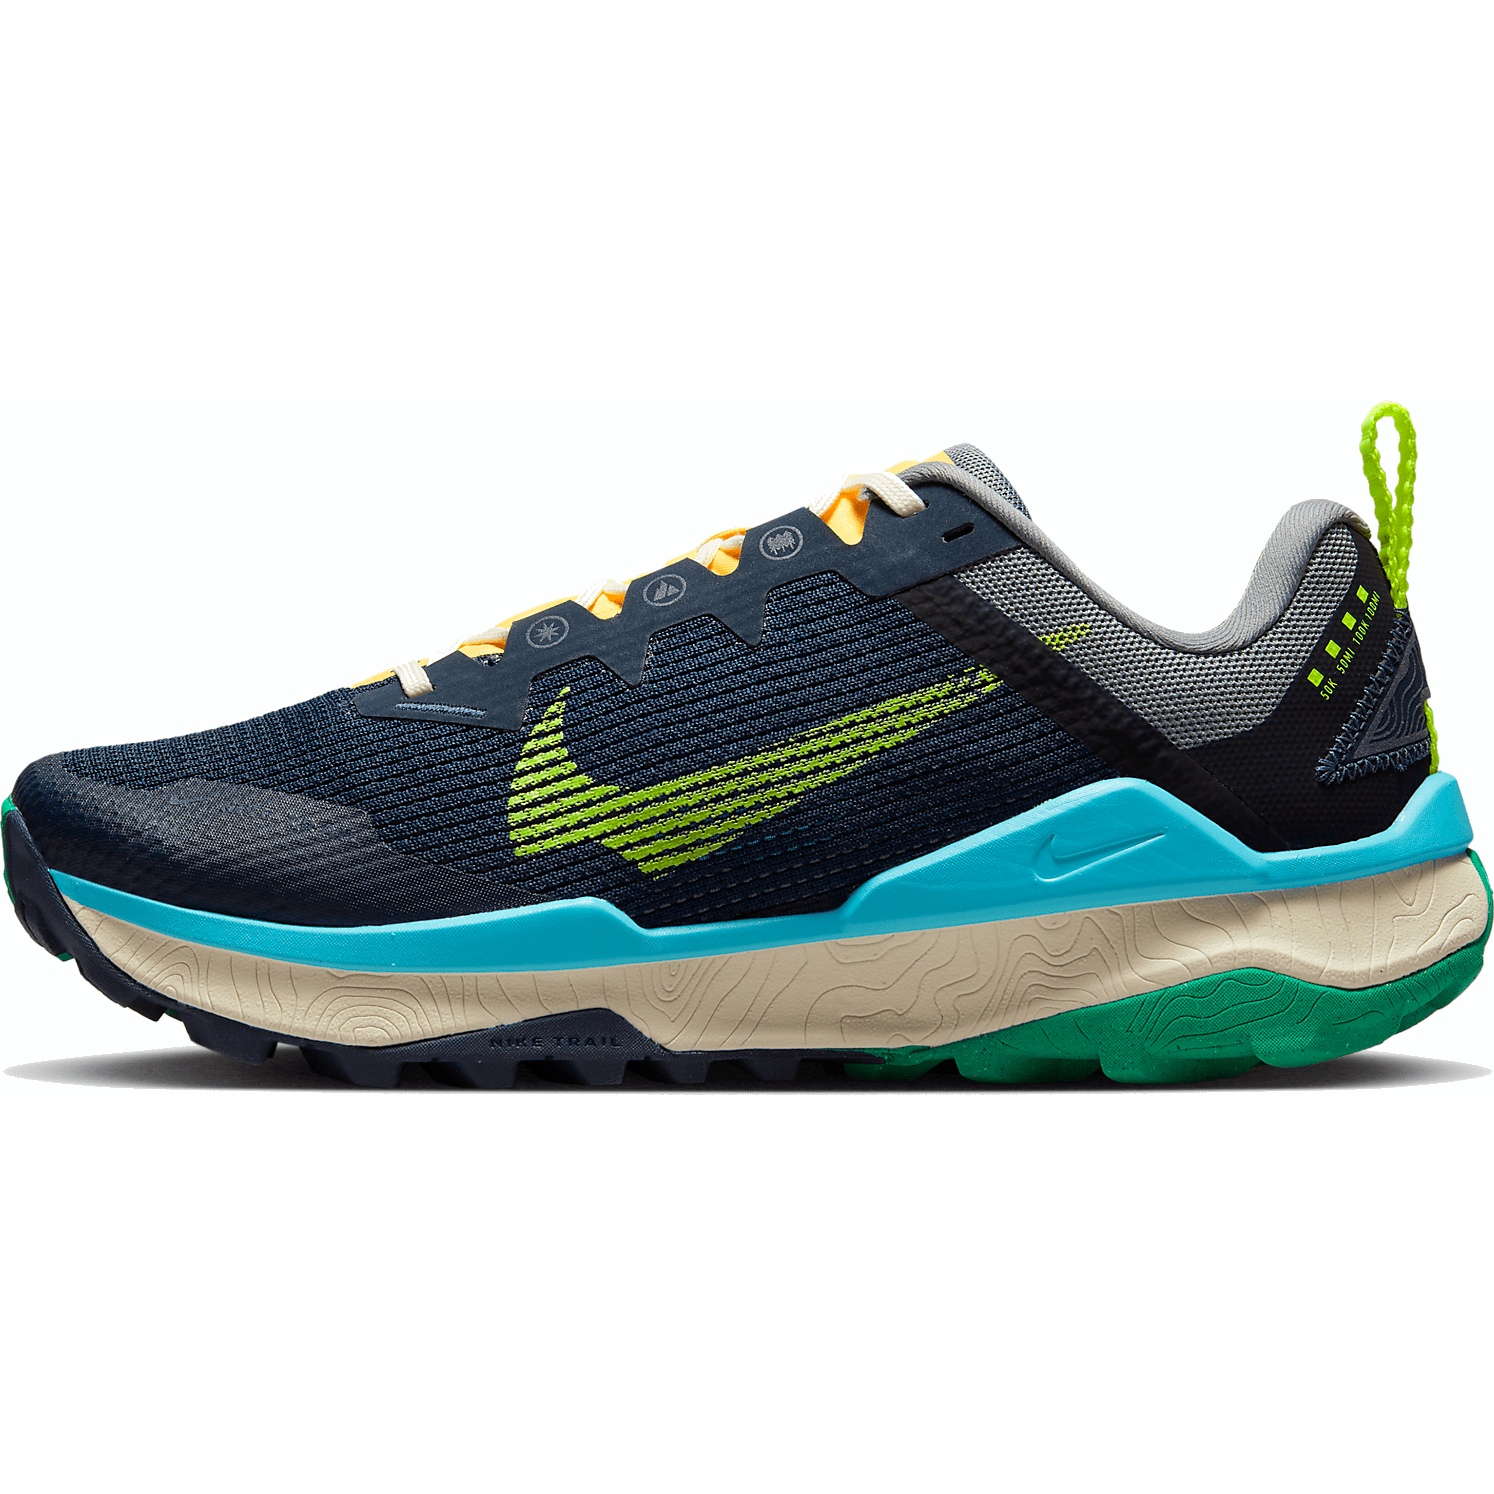 Picture of Nike React Wildhorse 8 Trail Running Shoes Women - obsidian/volt-cool grey-baltic blue DR2689-400